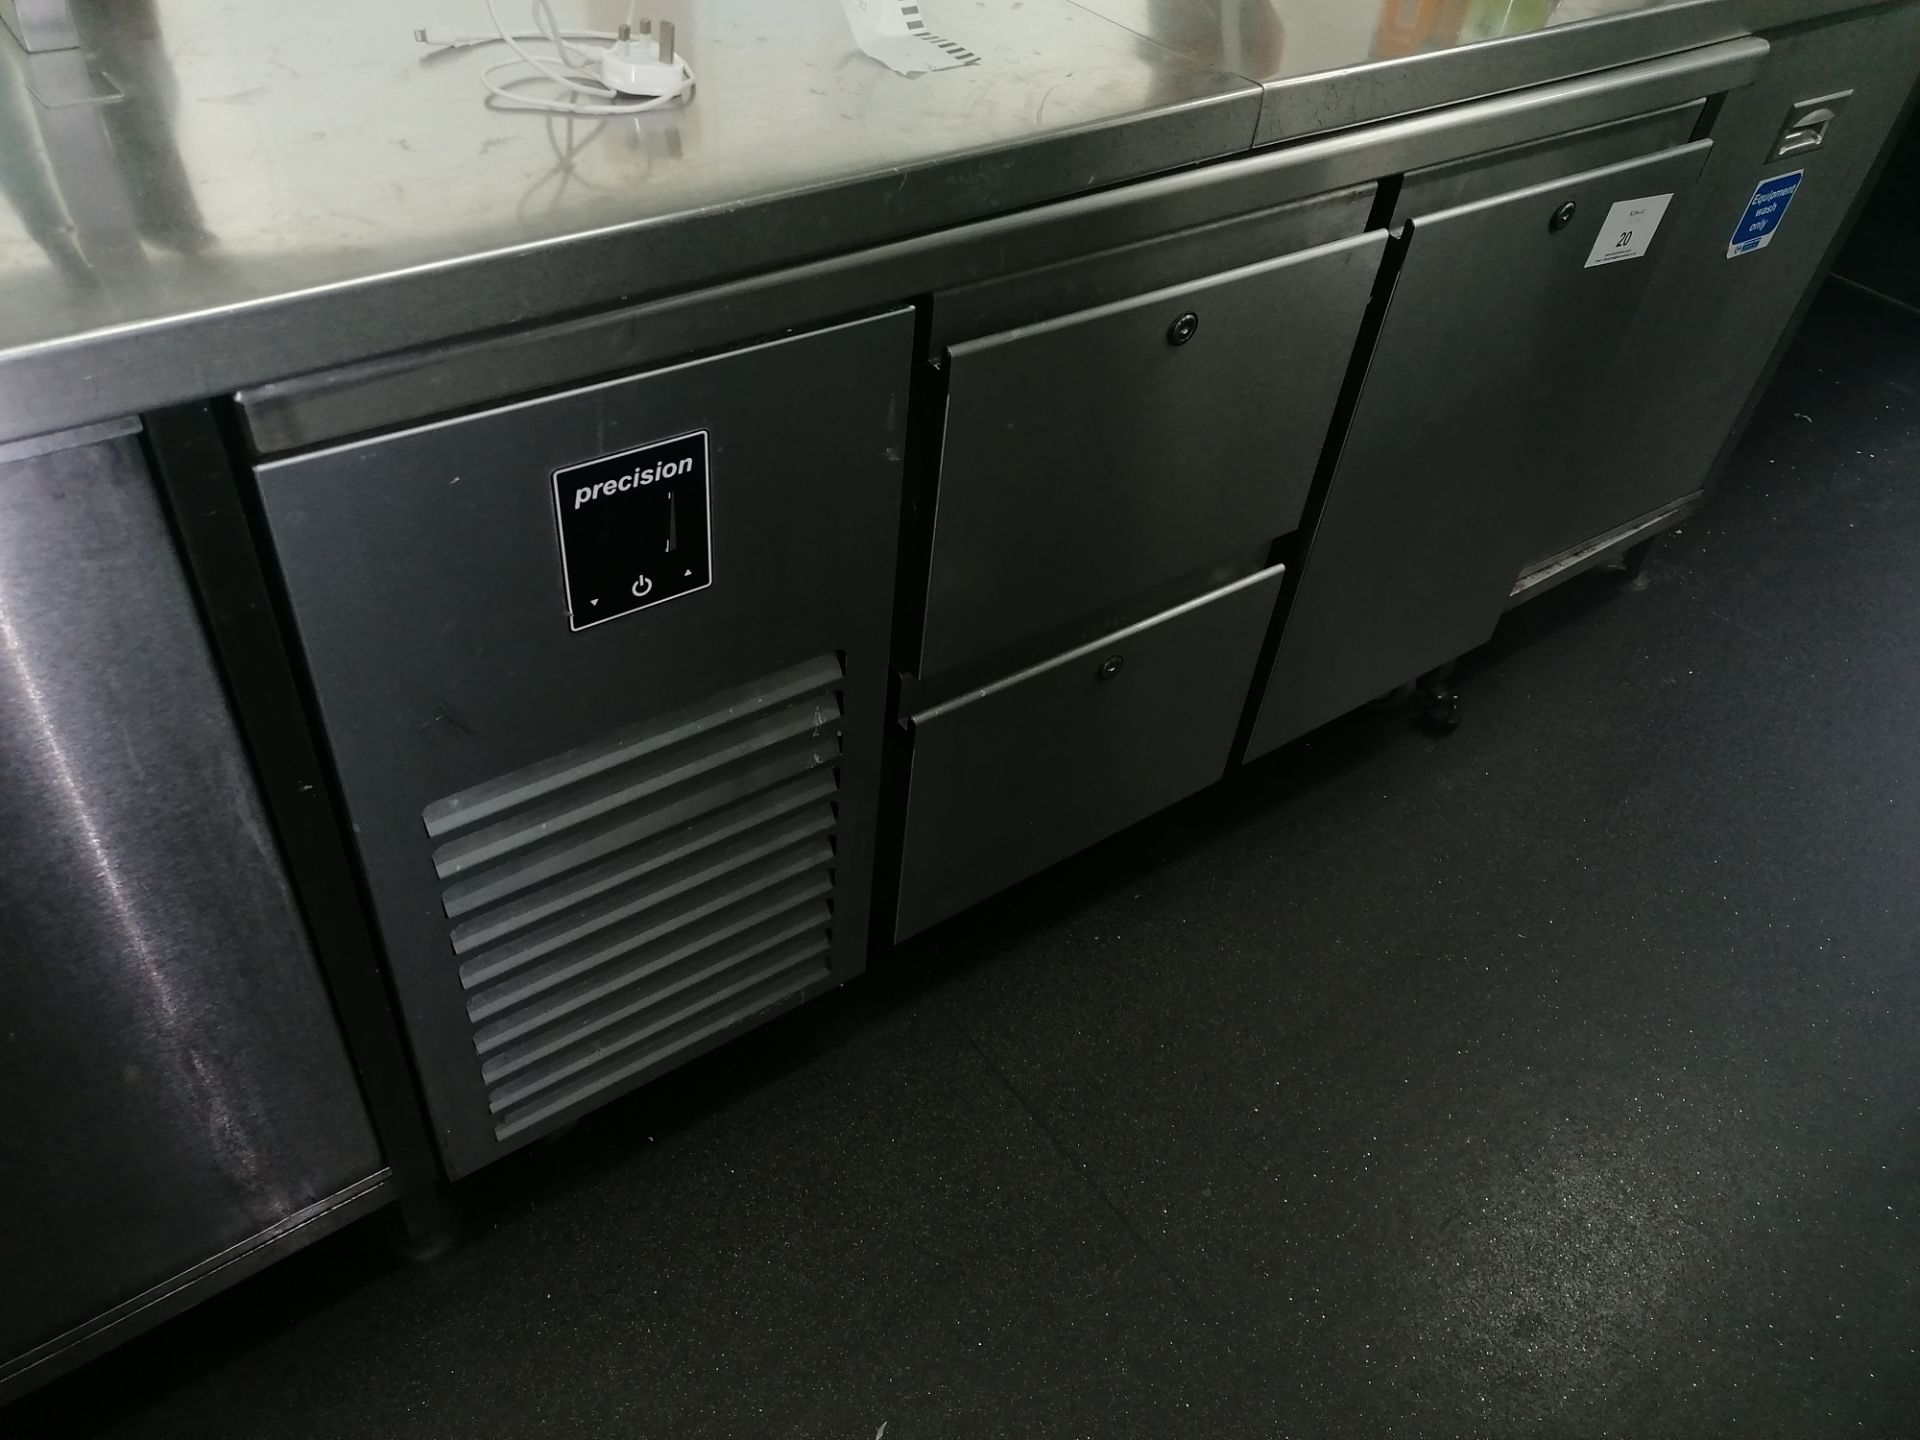 Precision MCU 211 Stainless steel Two Door Counter - Image 3 of 5